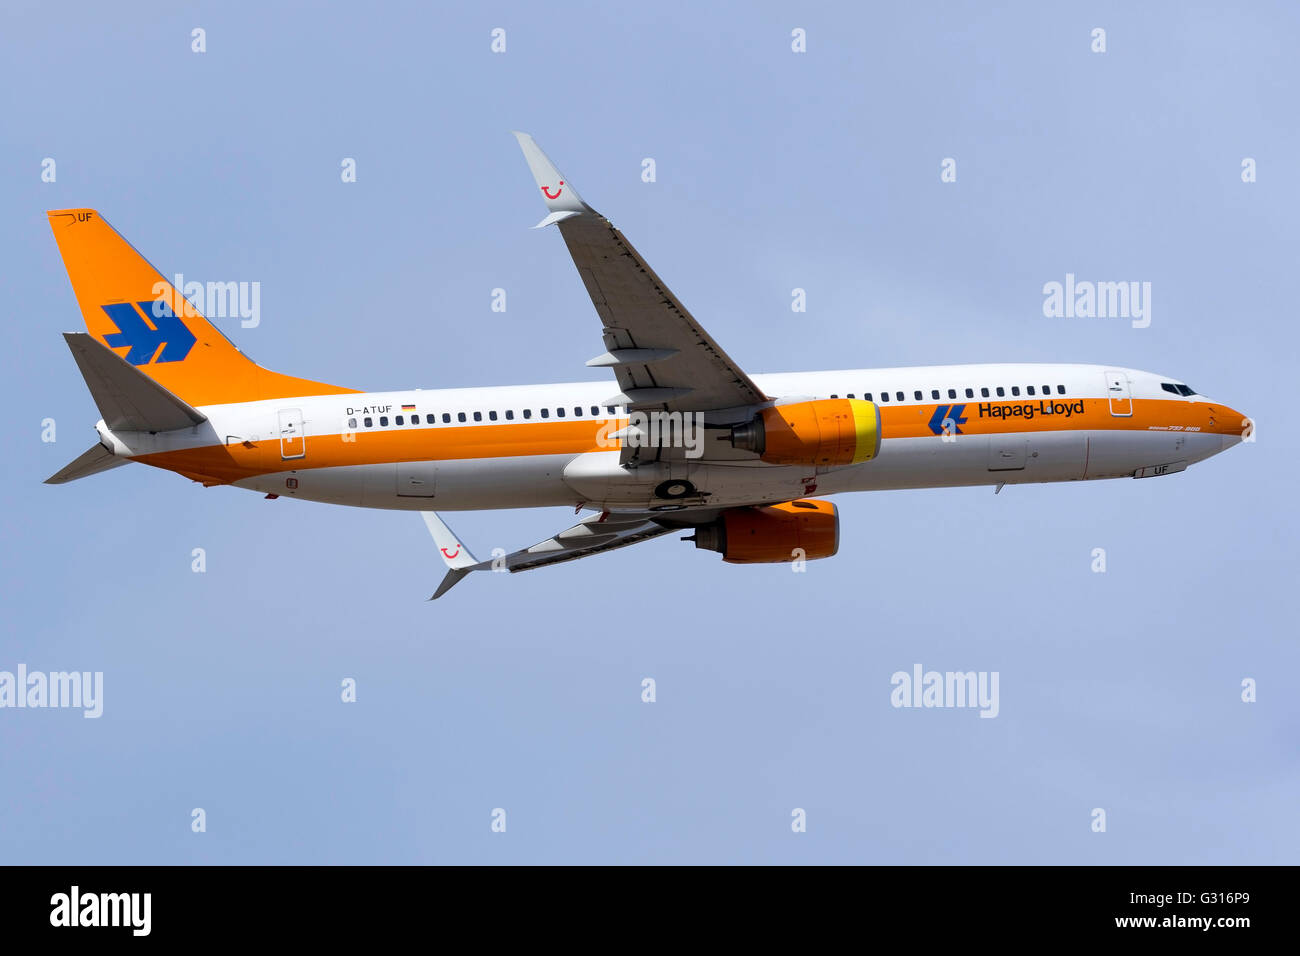 Hapag-Lloyd Boeing 737-8K5 [D-ATUF] departing on its second flight of the  day from Malta to Germany Stock Photo - Alamy